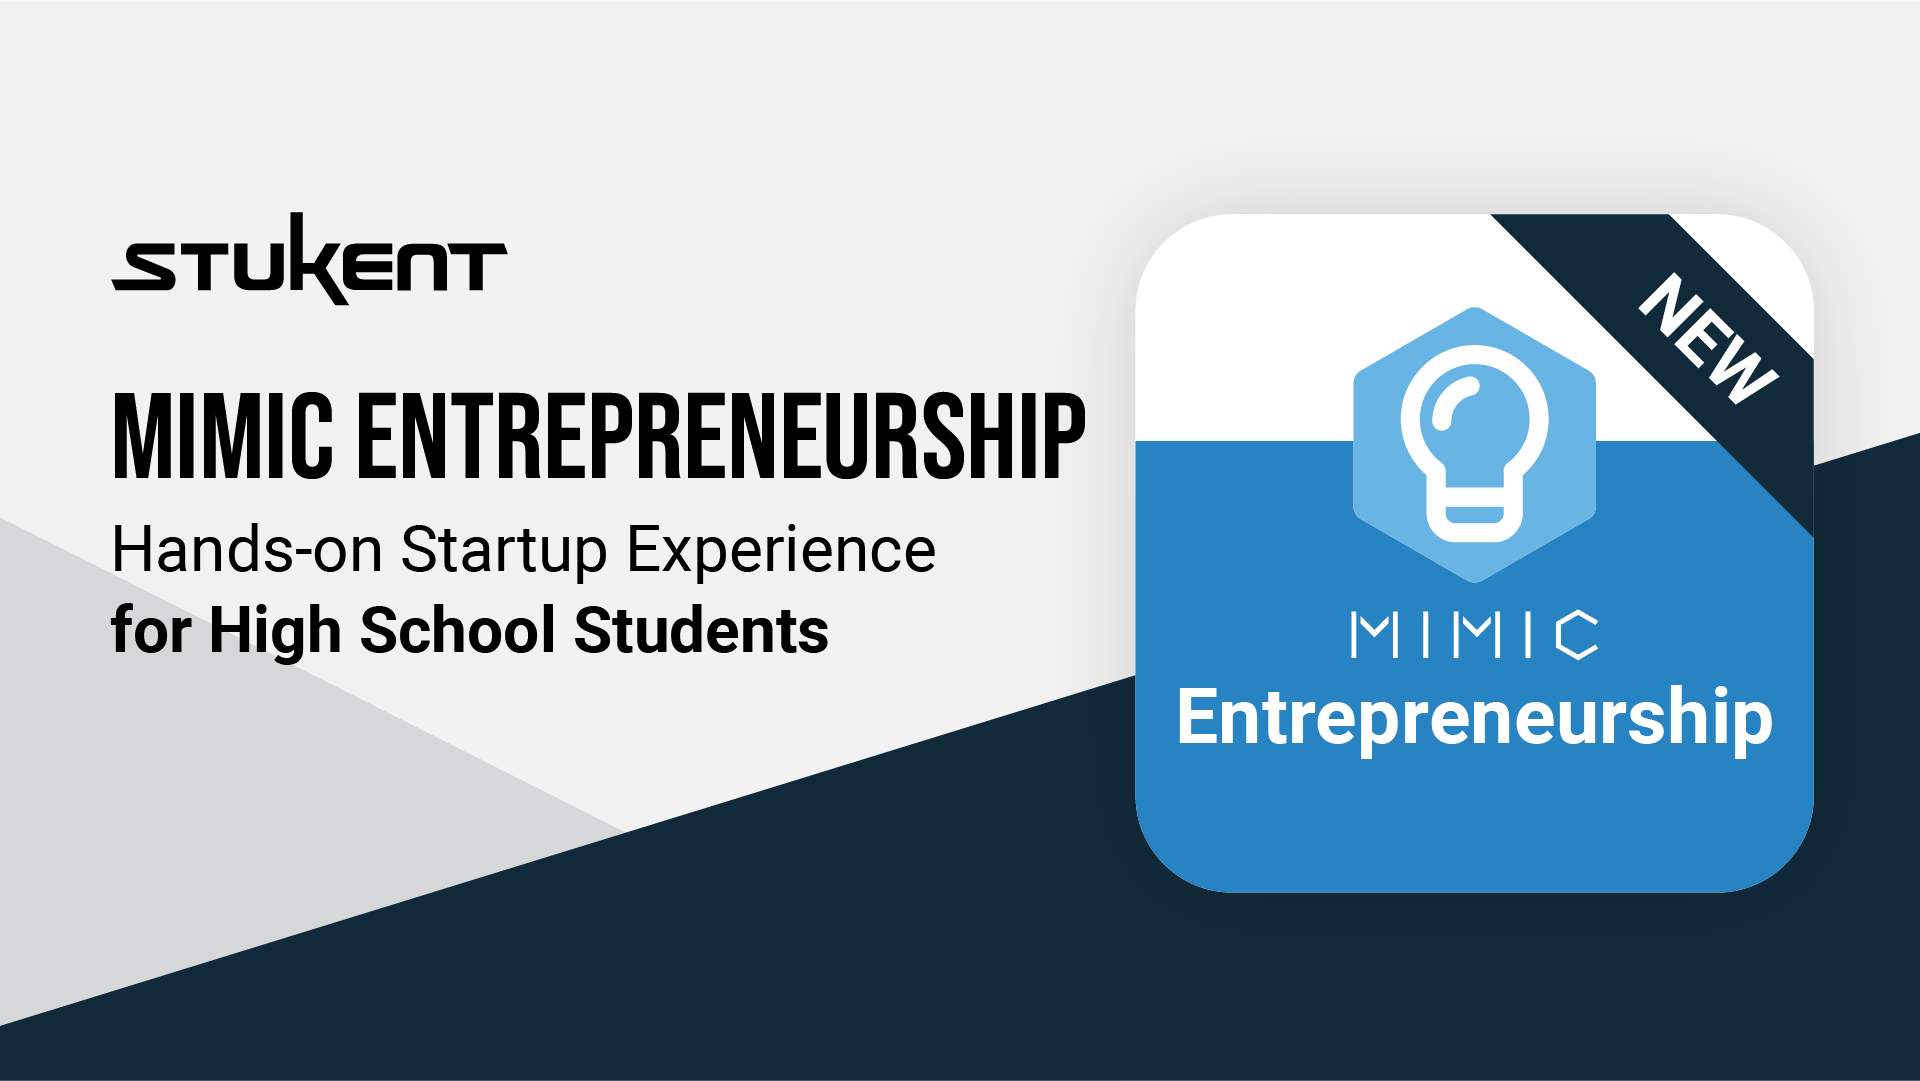 Mimic Entrepreneurship: Hands-on Startup Experience for High School Students